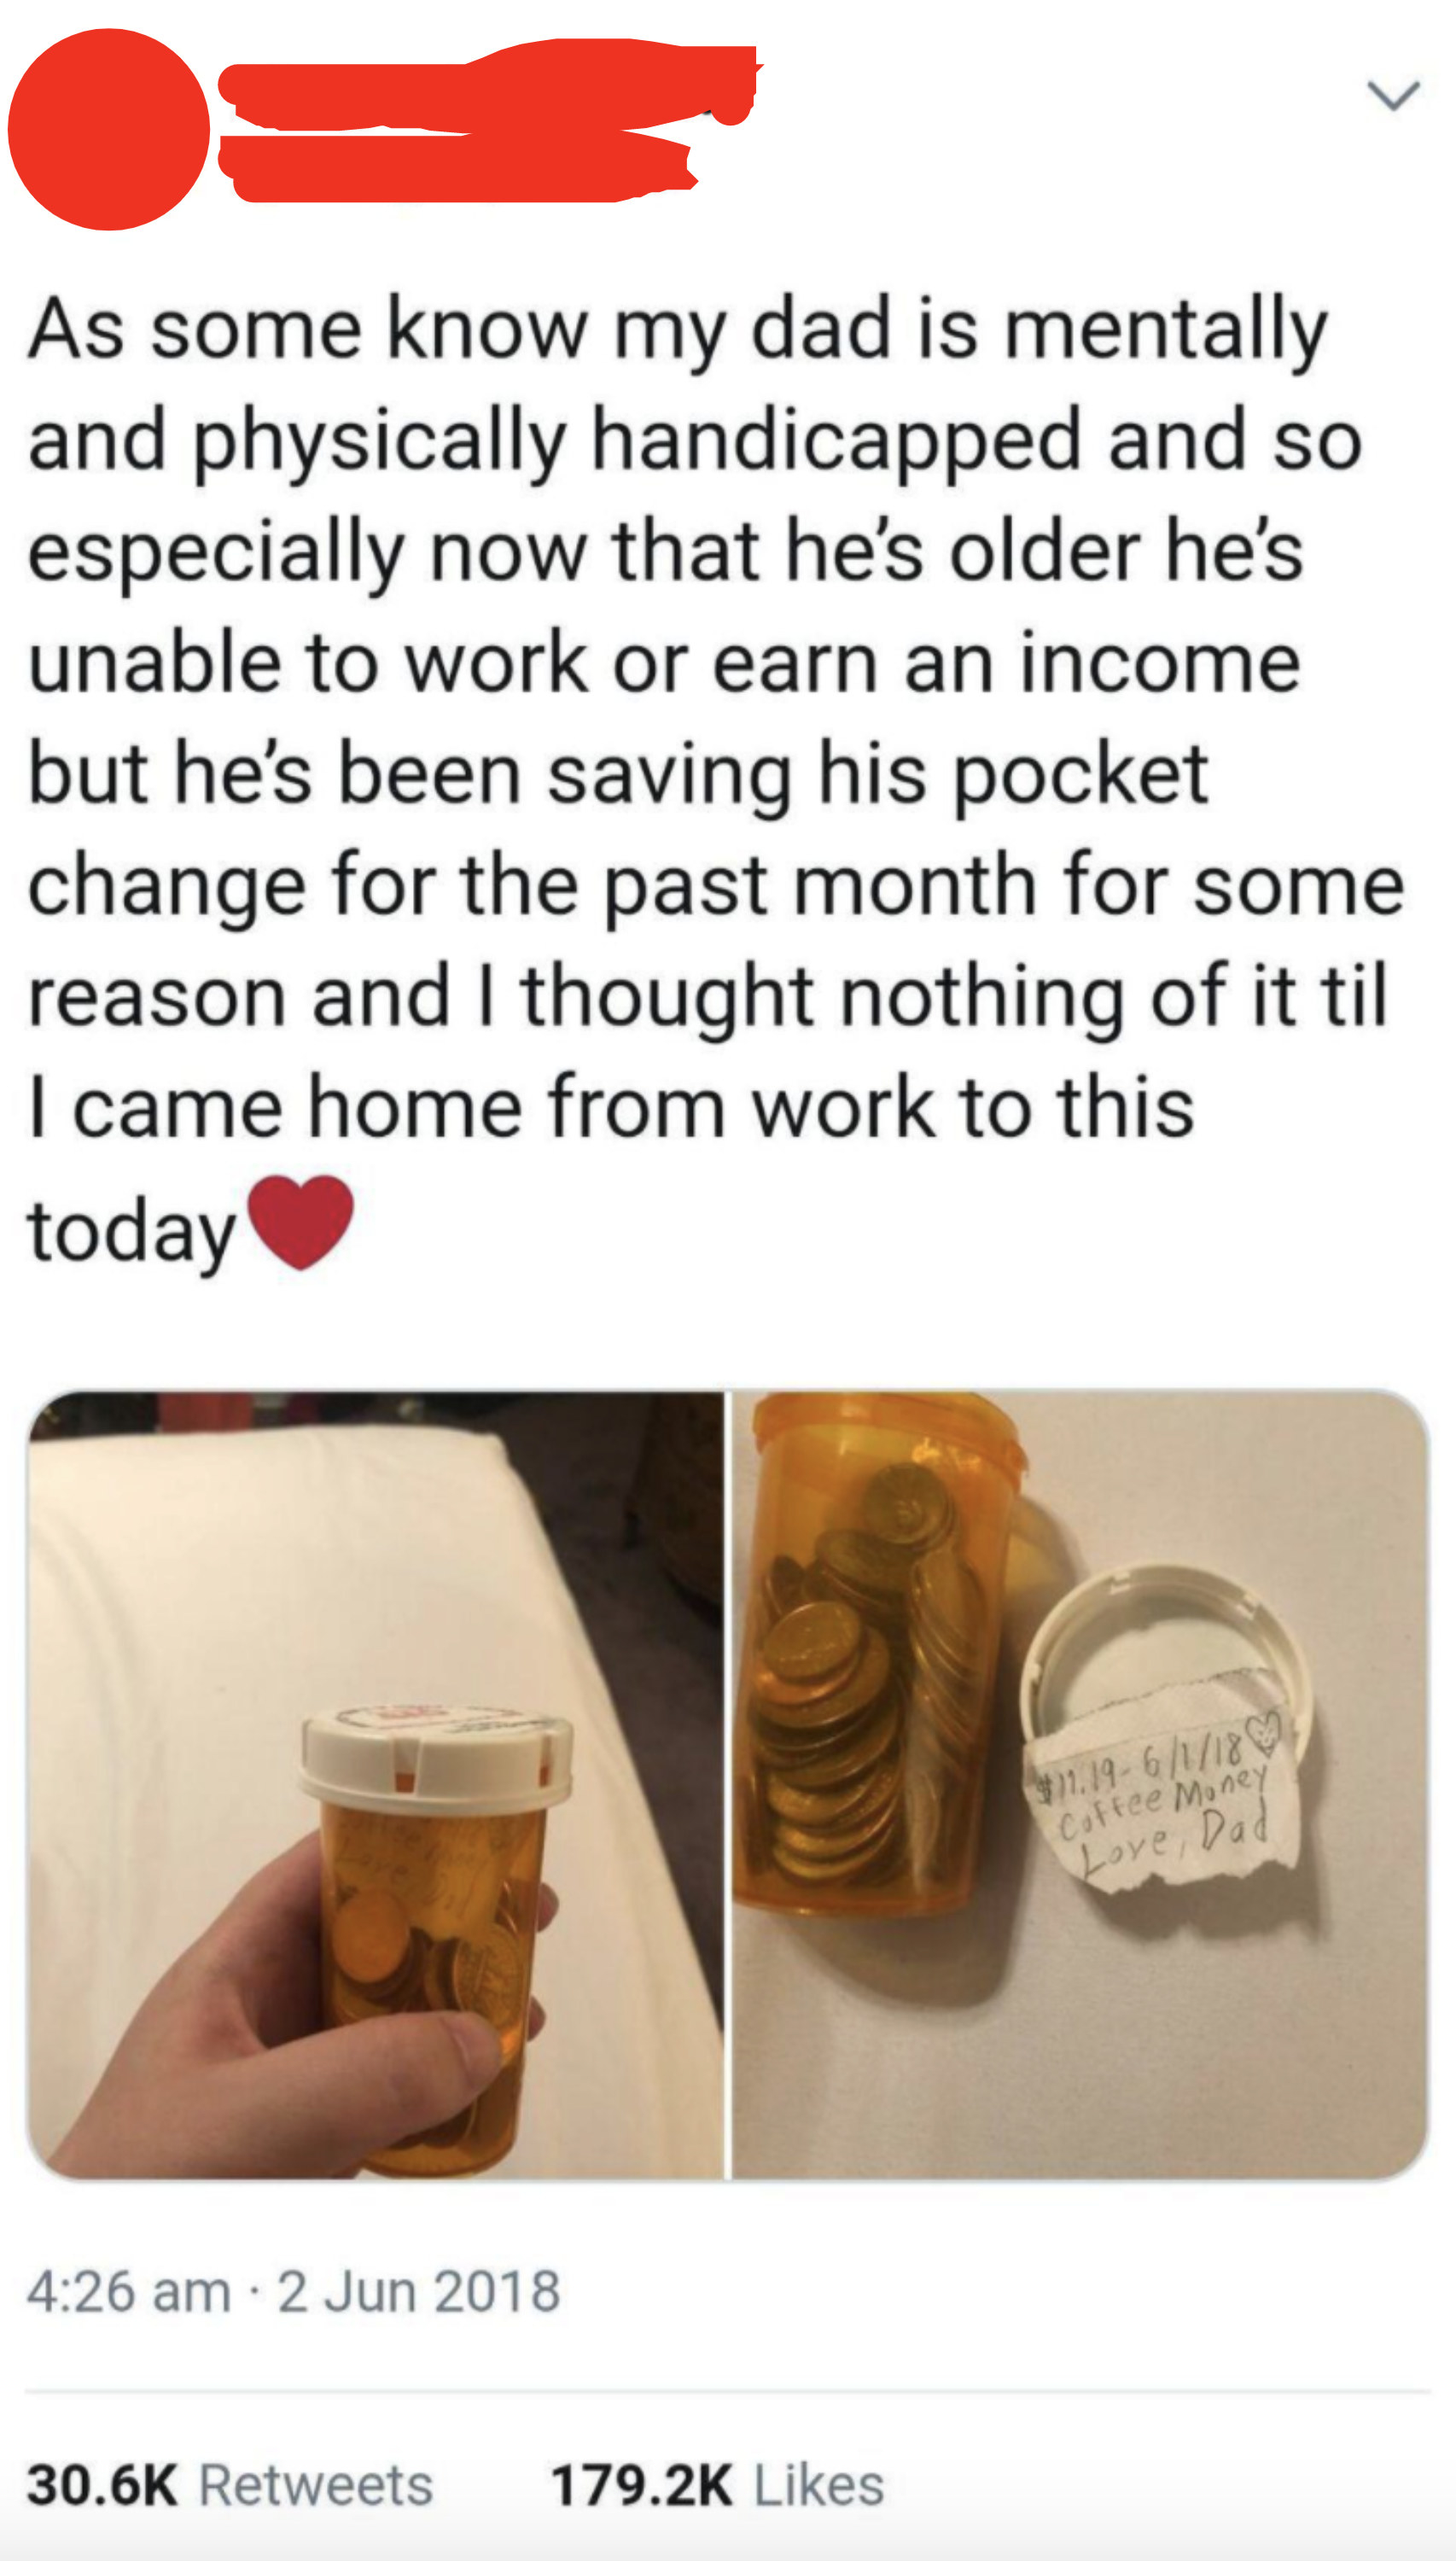 Dad who saved pocket change for his daughter, gave it to her in a pill bottle